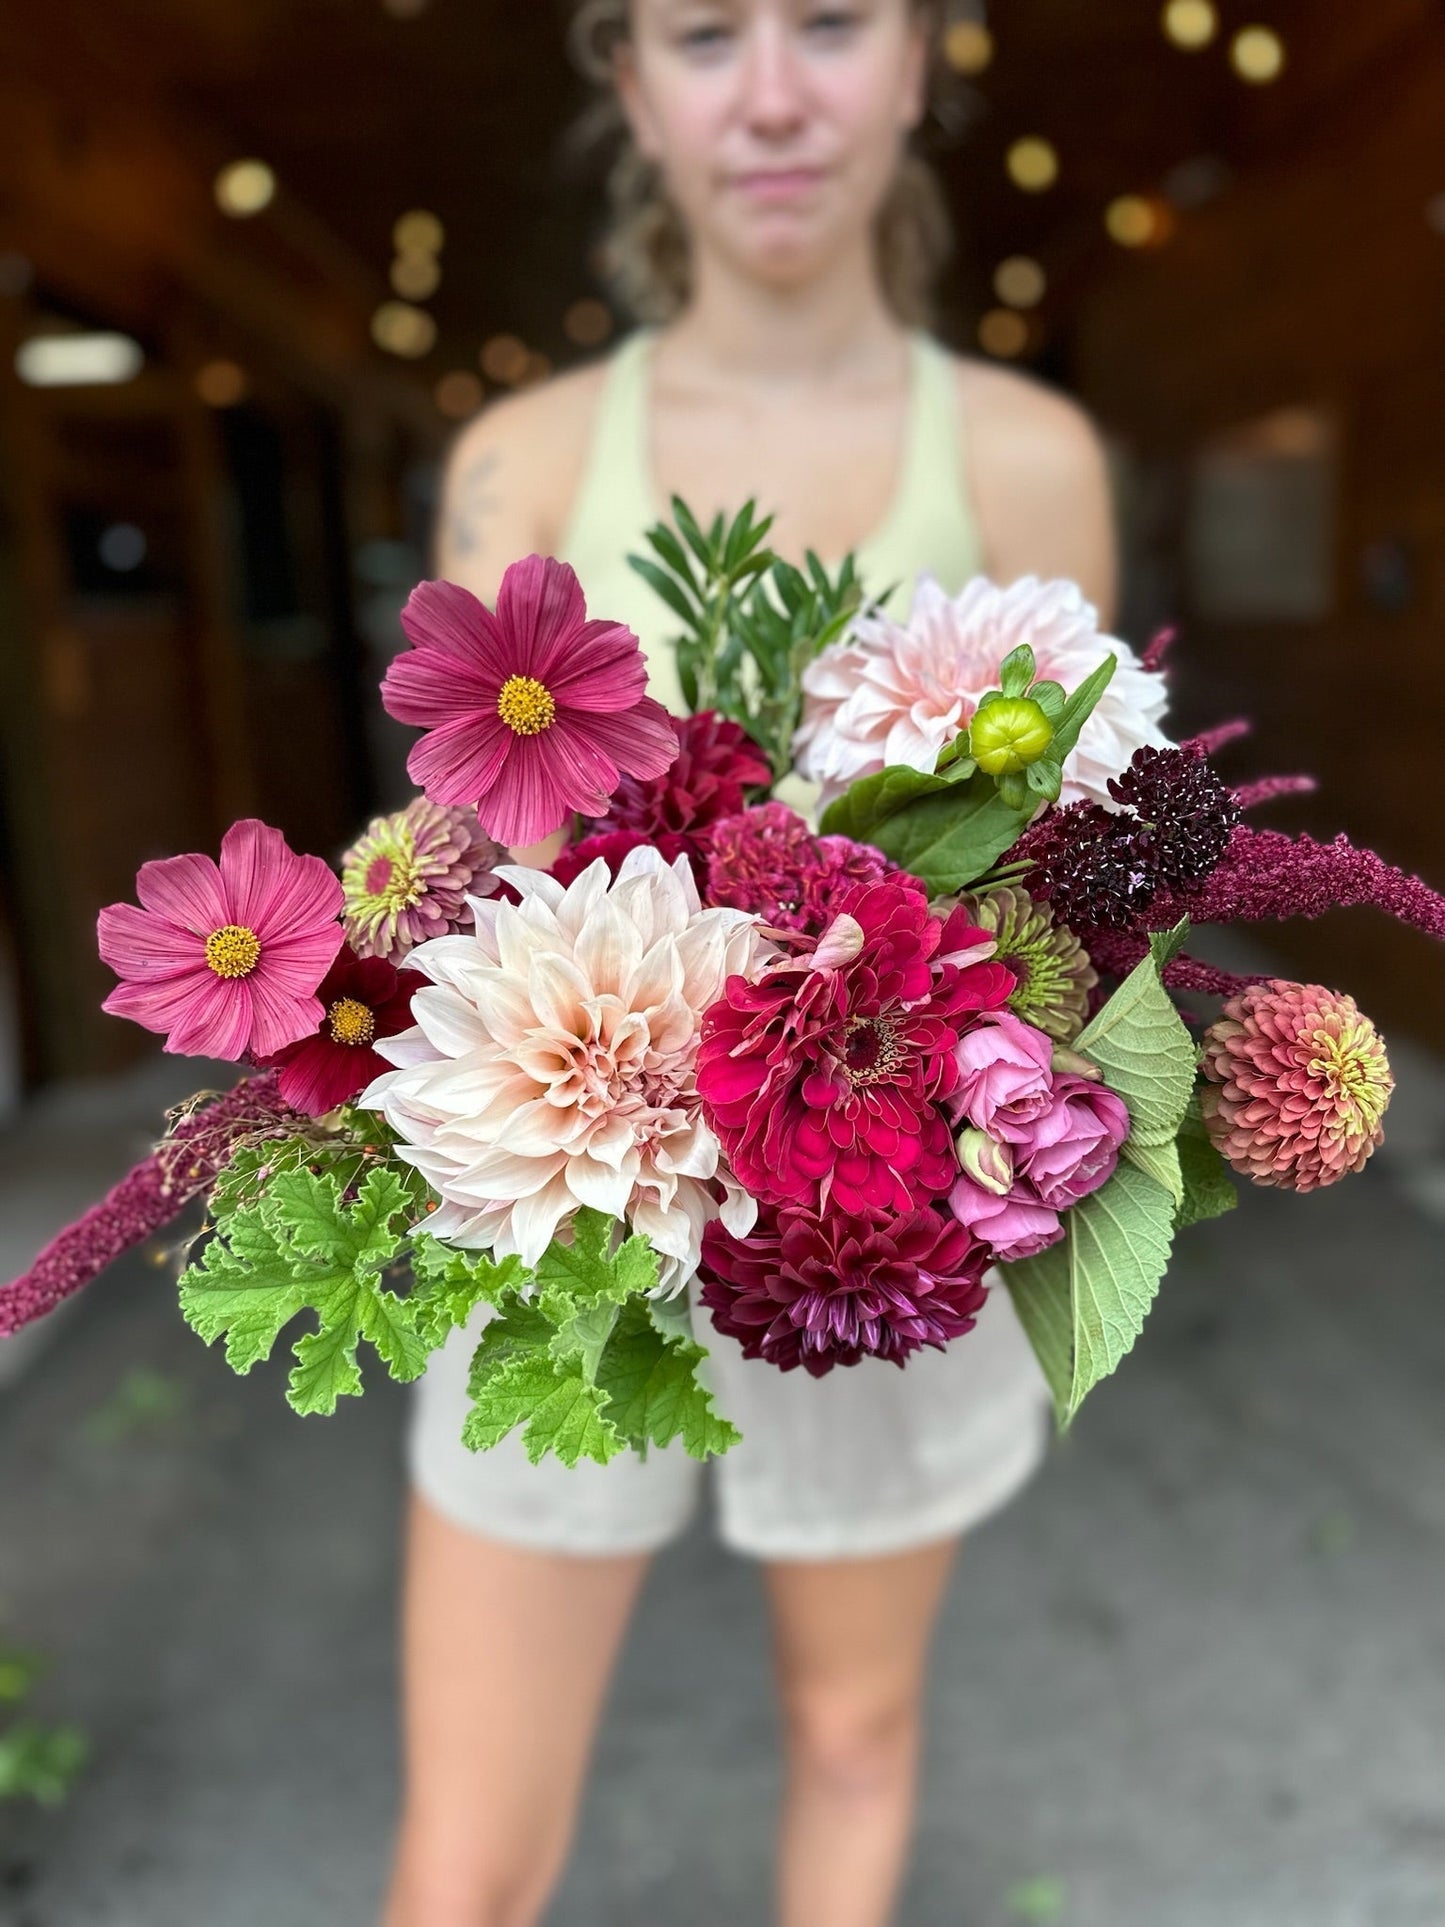 Fall CSA: Weekly Bouquet Share